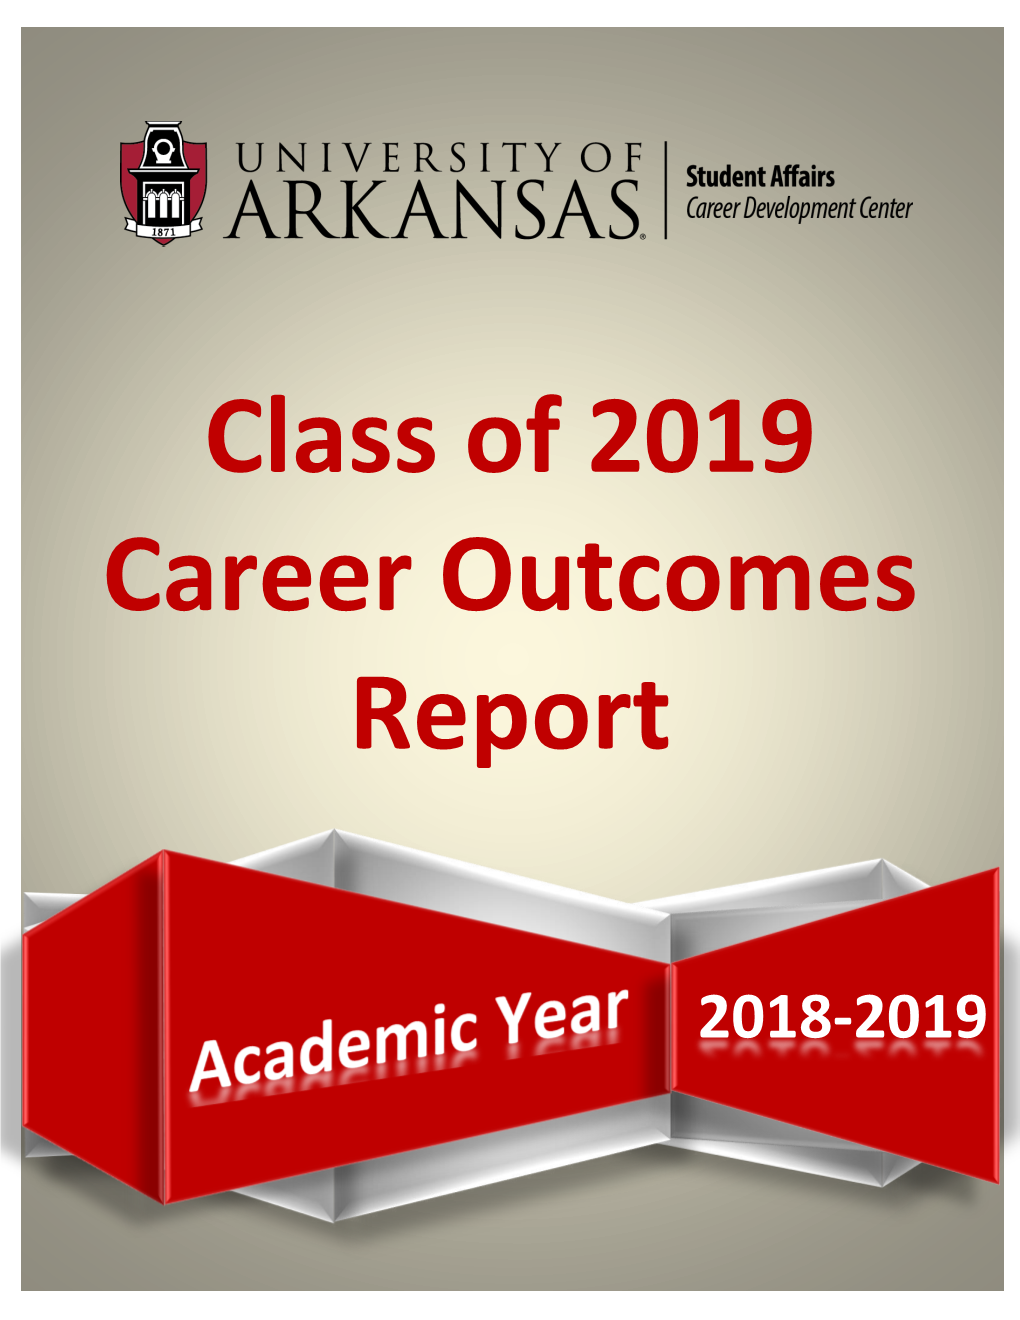 Class of 2019 Career Outcomes Report]